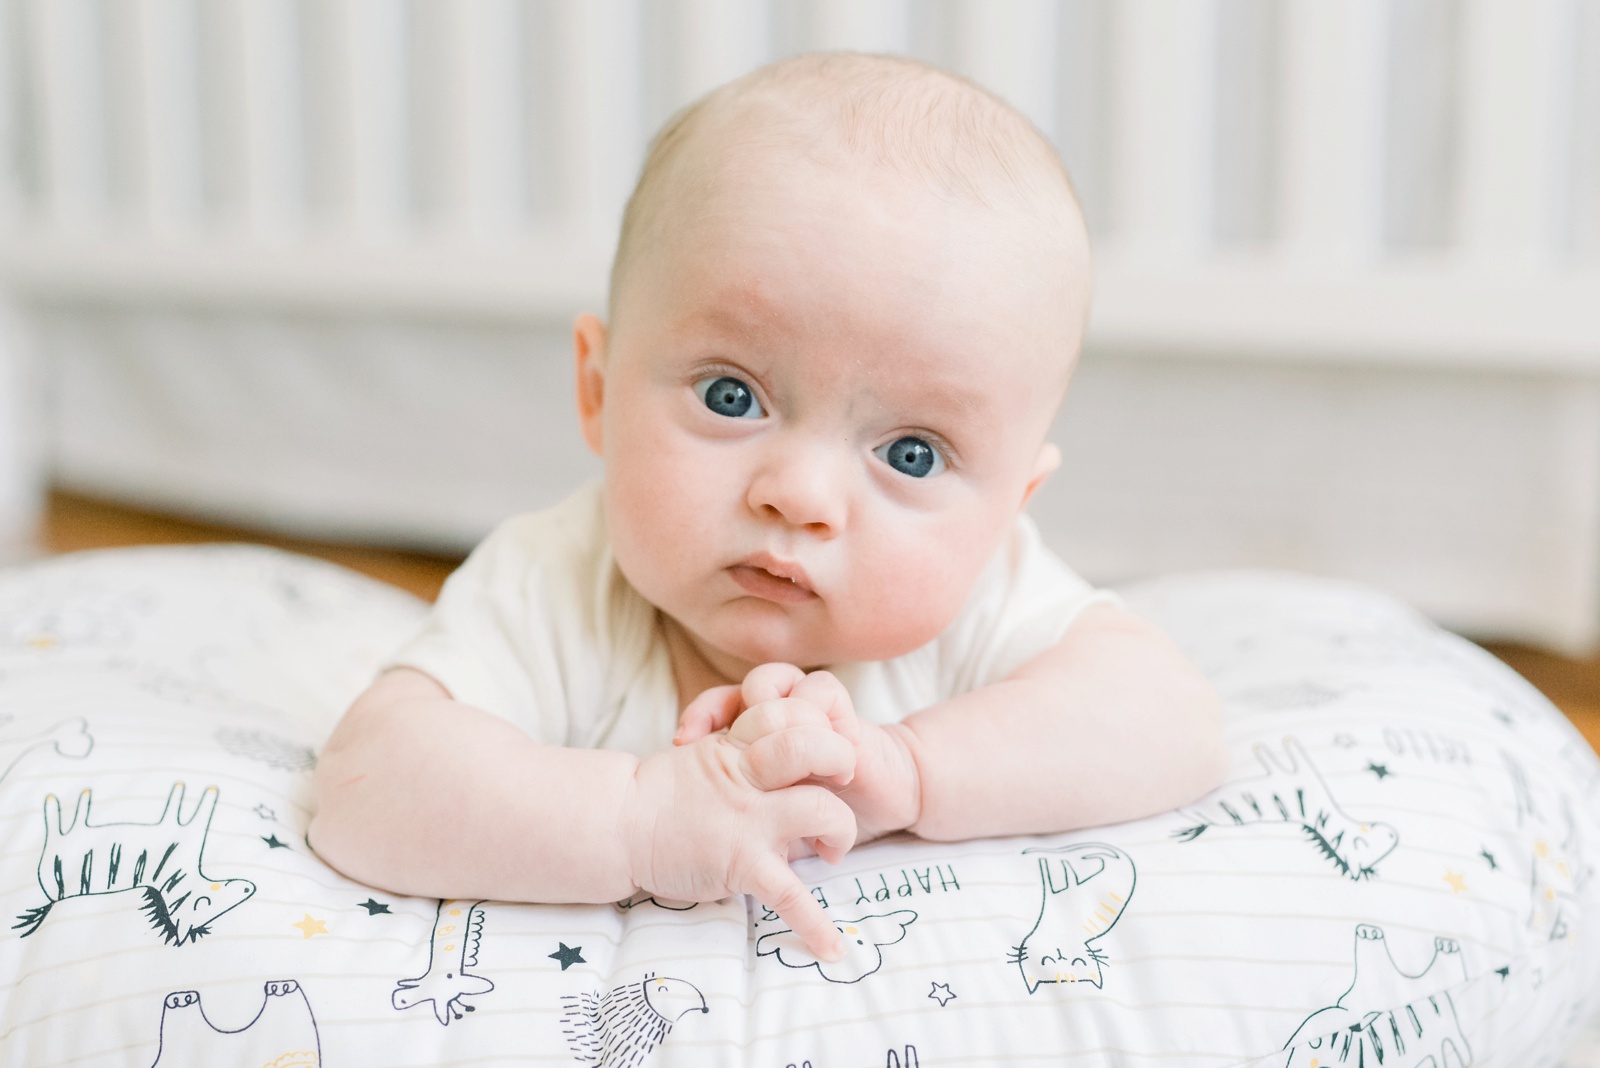 sweet-baby-james-allen-4-and-5-months-old-photo_7523.jpg